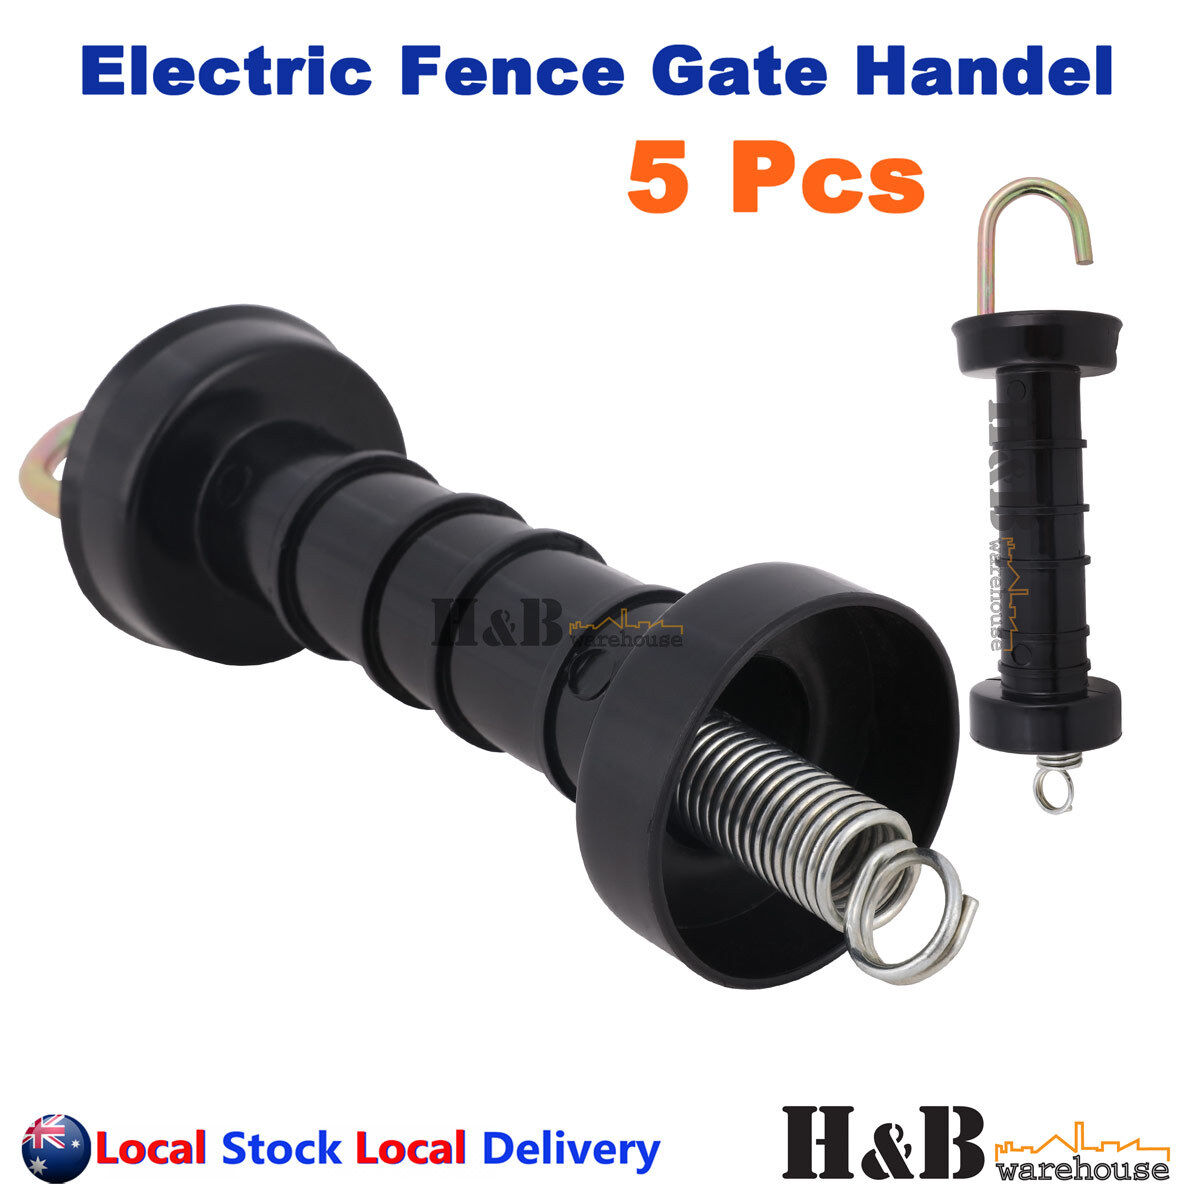 5 Pcs Electric Fence Gate Handle Insulated Spring Handles Black